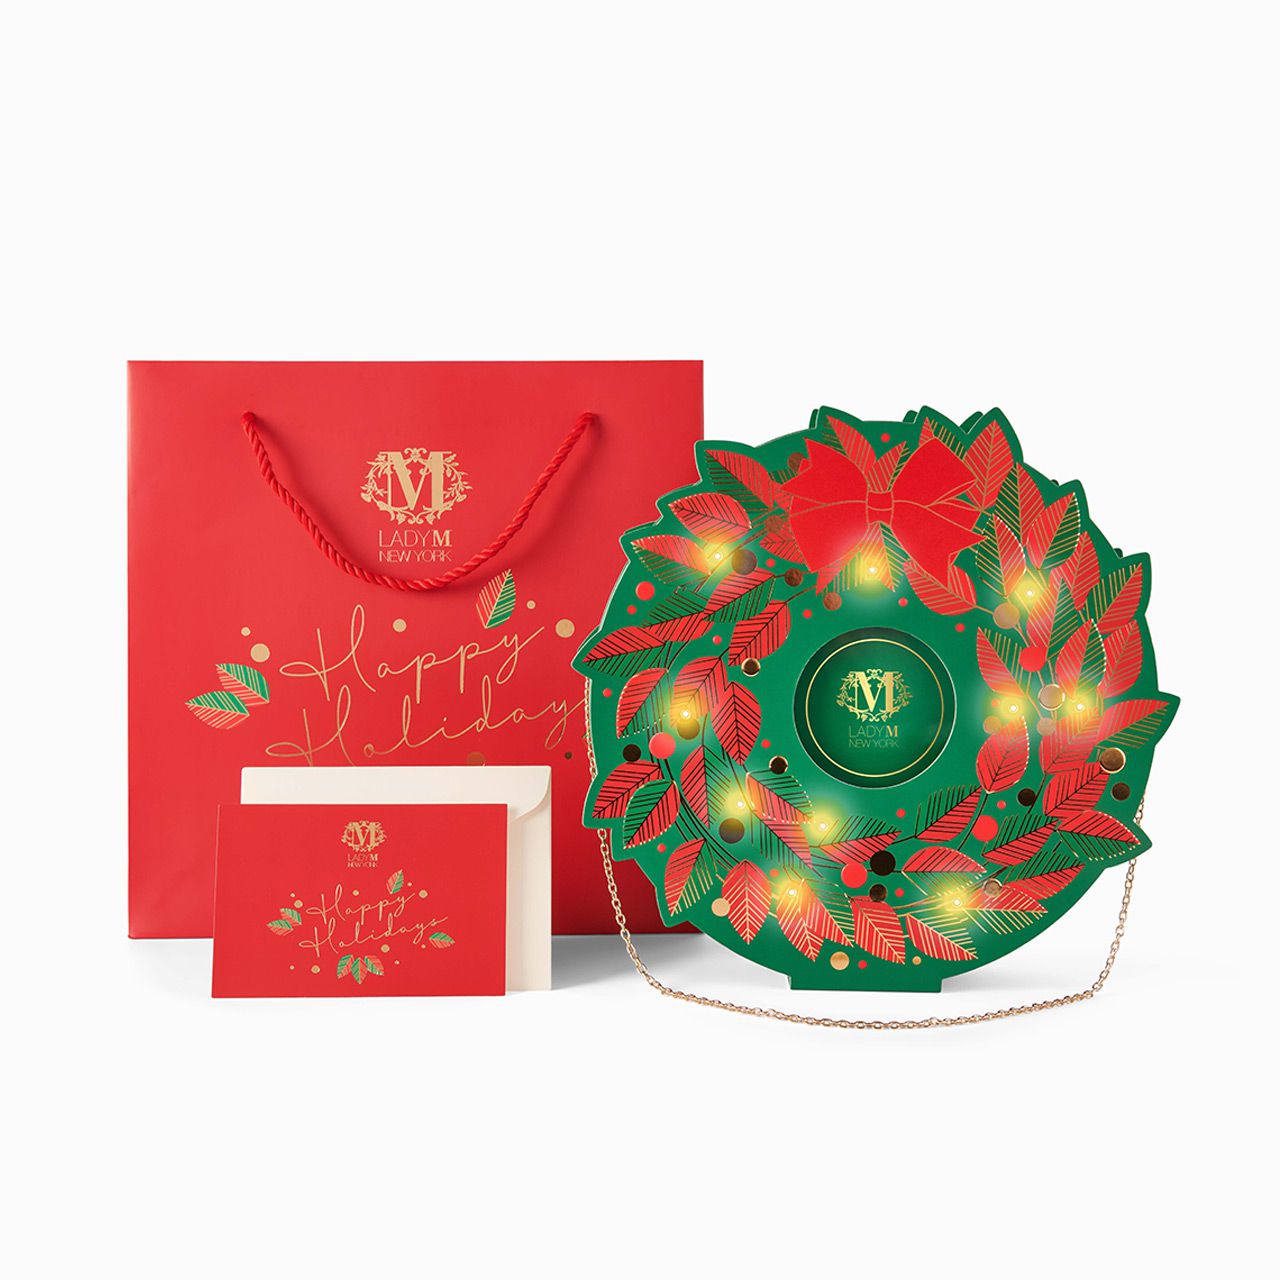 wreath shaped advent calendar with gift bag